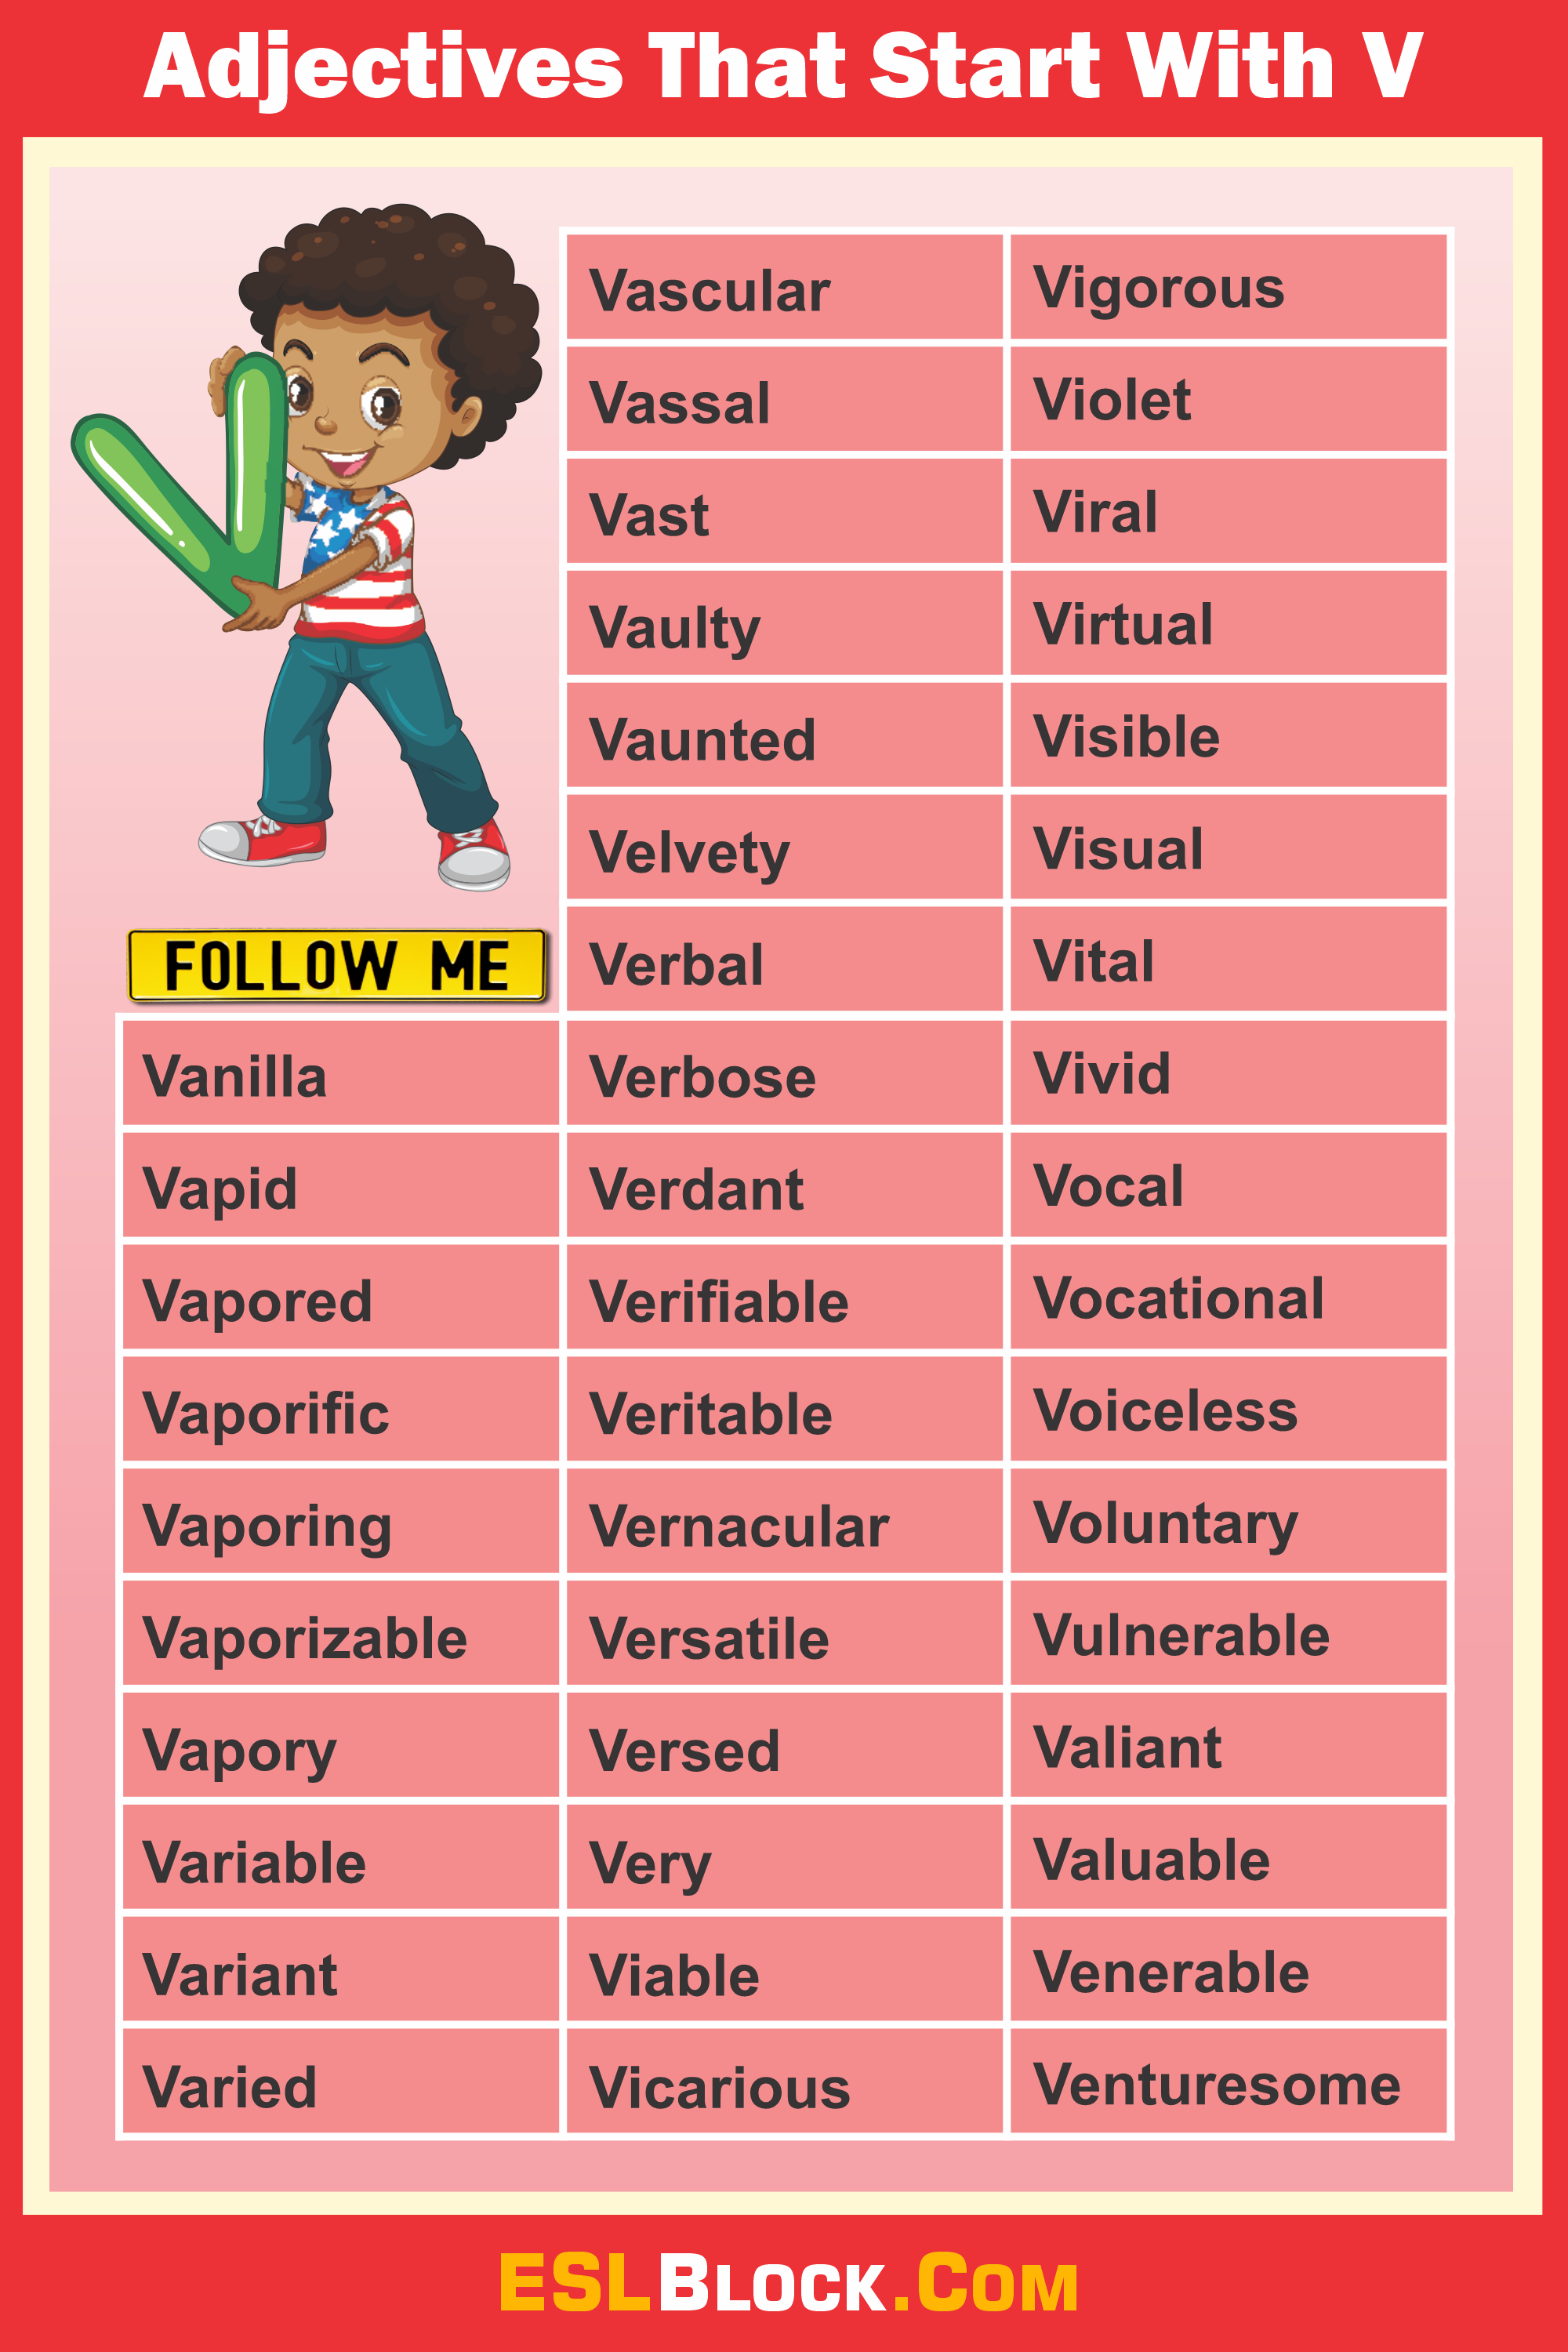 A-Z Adjectives, Adjective Words, Adjectives, V Words, Vocabulary, Words That Describe a Person, Adjectives that start with V, Descriptive words that start with V